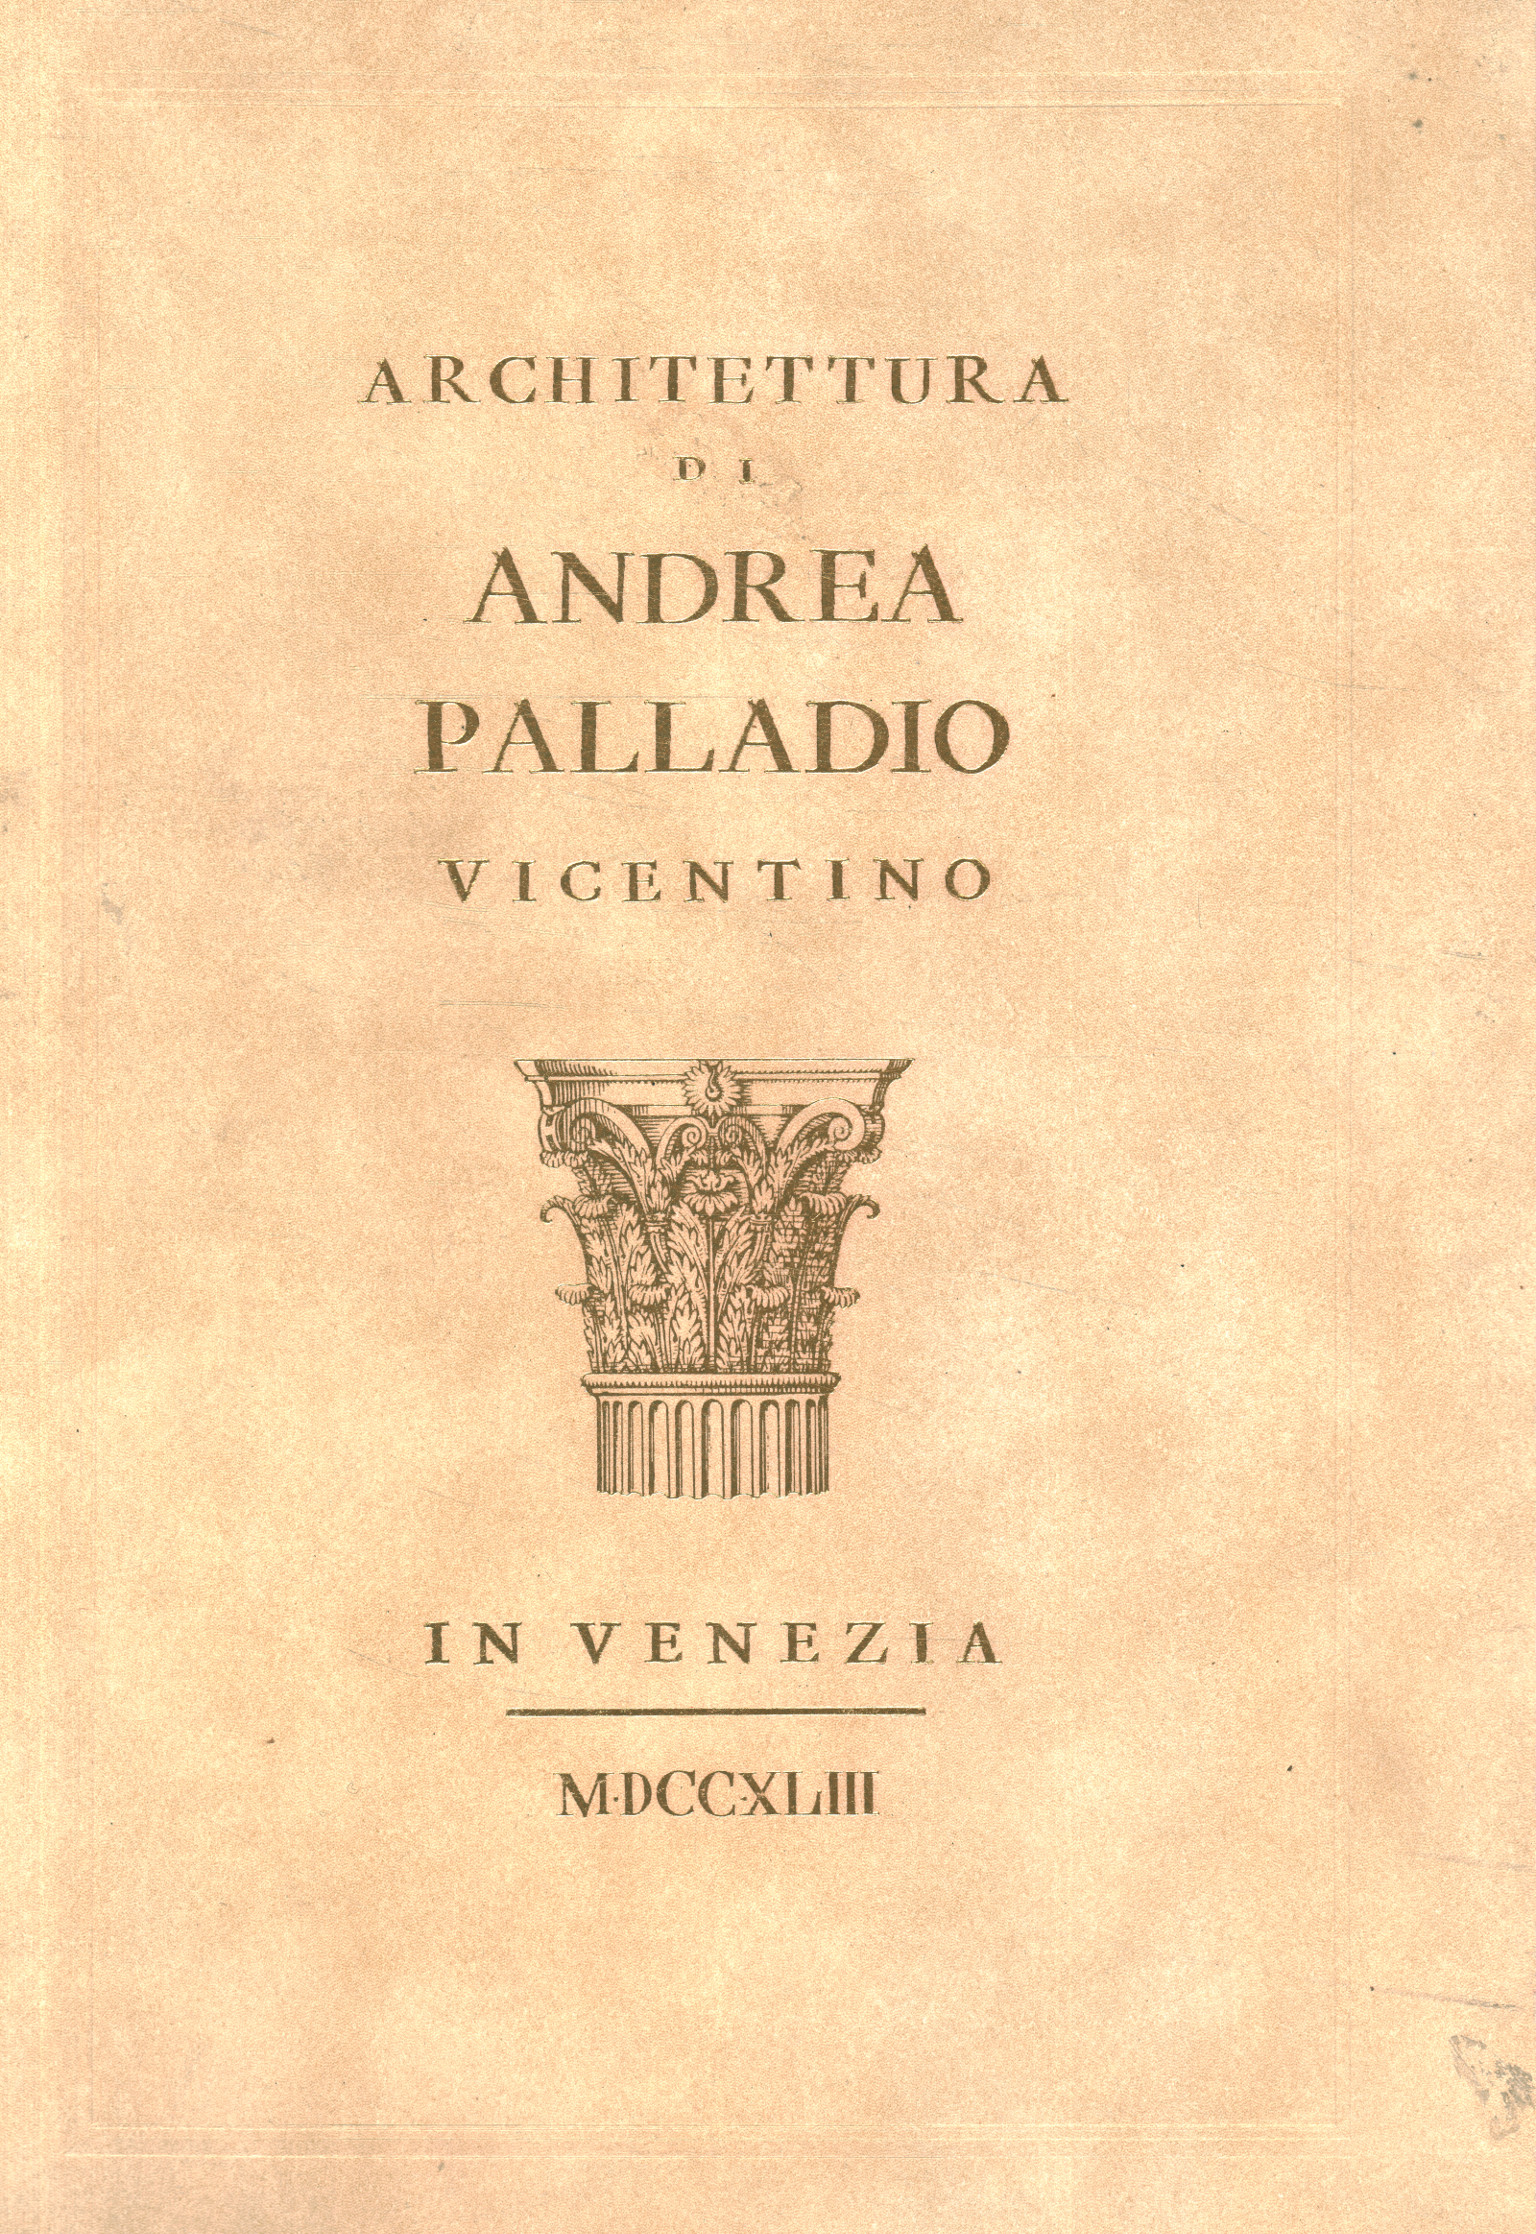 Architecture by Andrea Palladio from Vicenza%